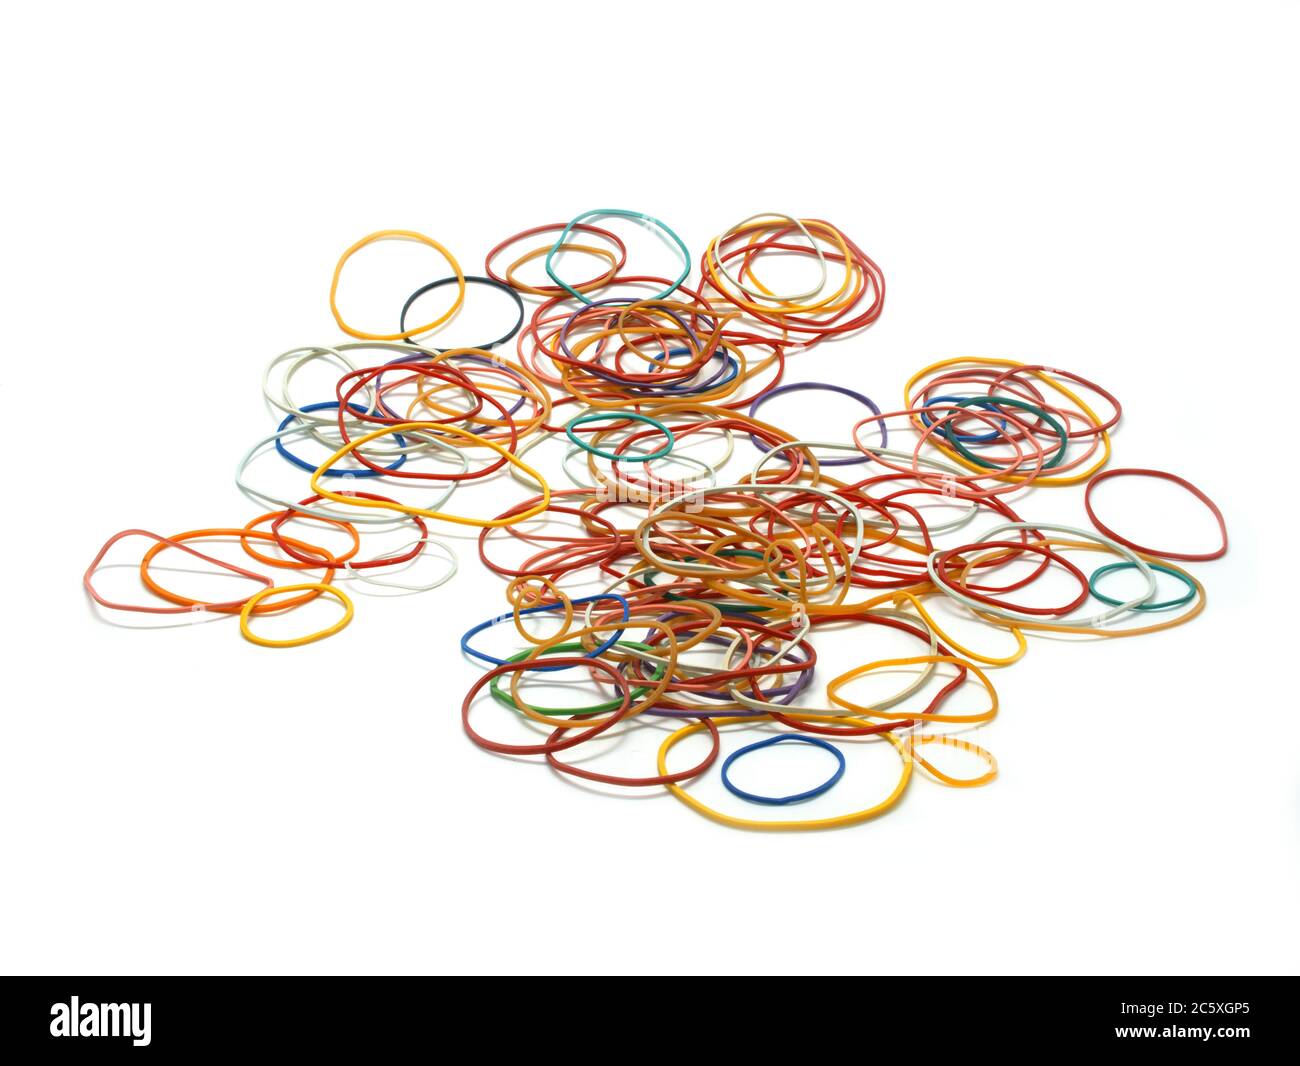 Round rubber bands Cut Out Stock Images & Pictures - Page 2 - Alamy